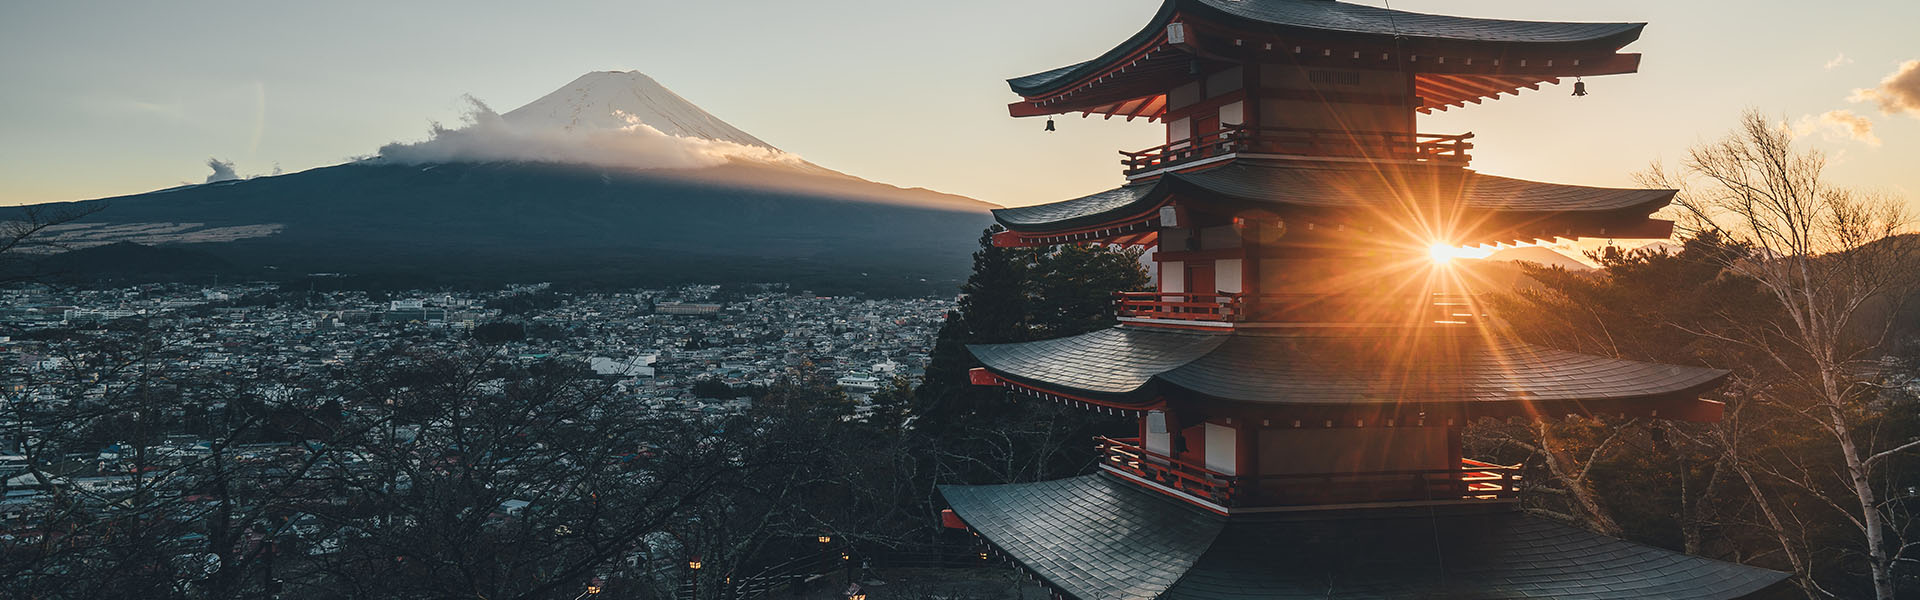 View of Japan with japanese architecture and Mount Fuji in background